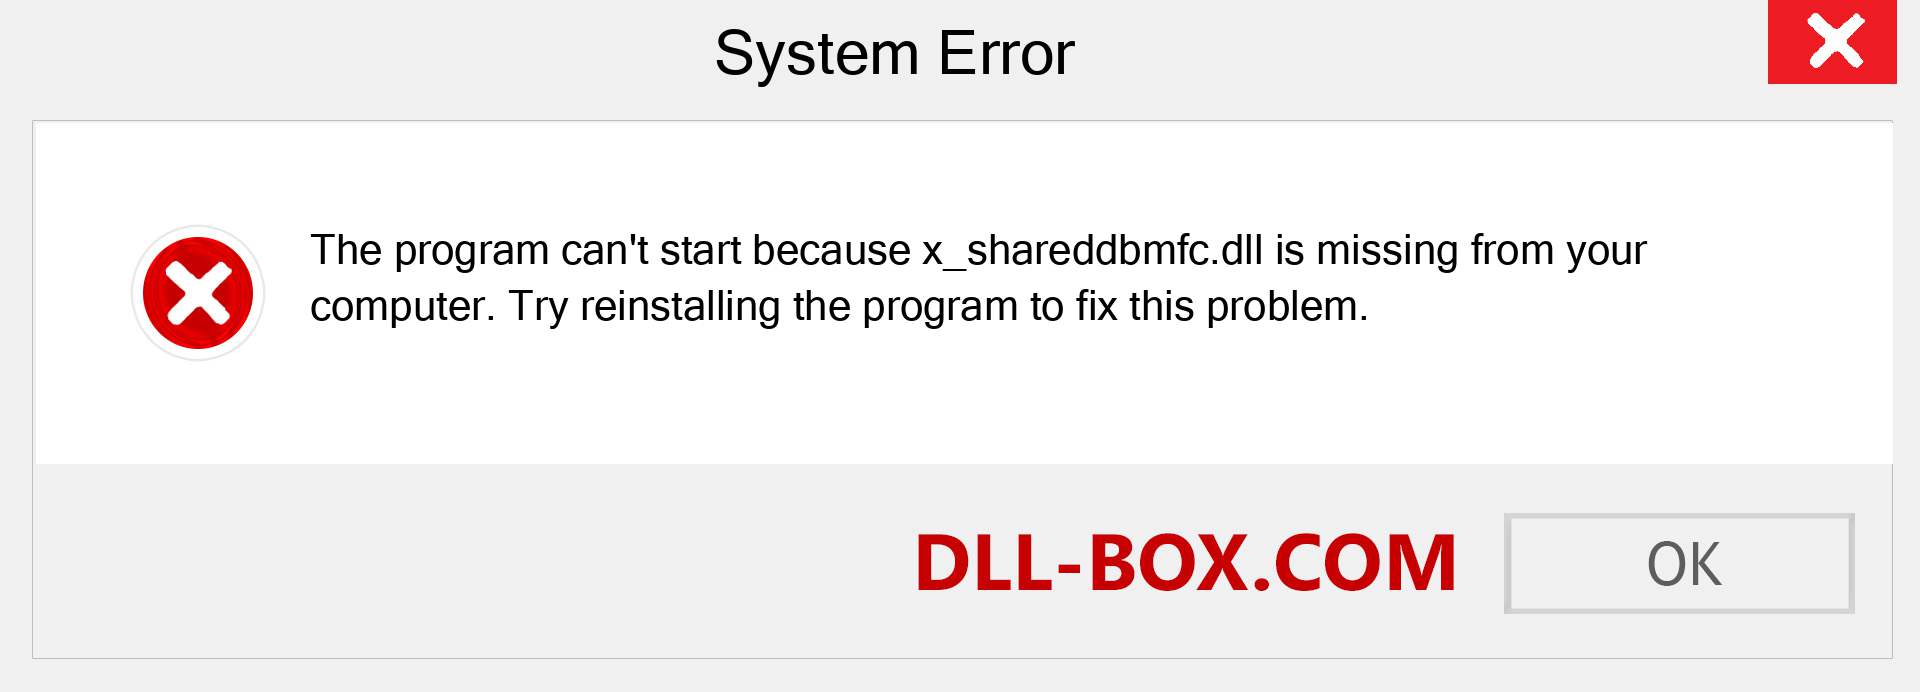  x_shareddbmfc.dll file is missing?. Download for Windows 7, 8, 10 - Fix  x_shareddbmfc dll Missing Error on Windows, photos, images